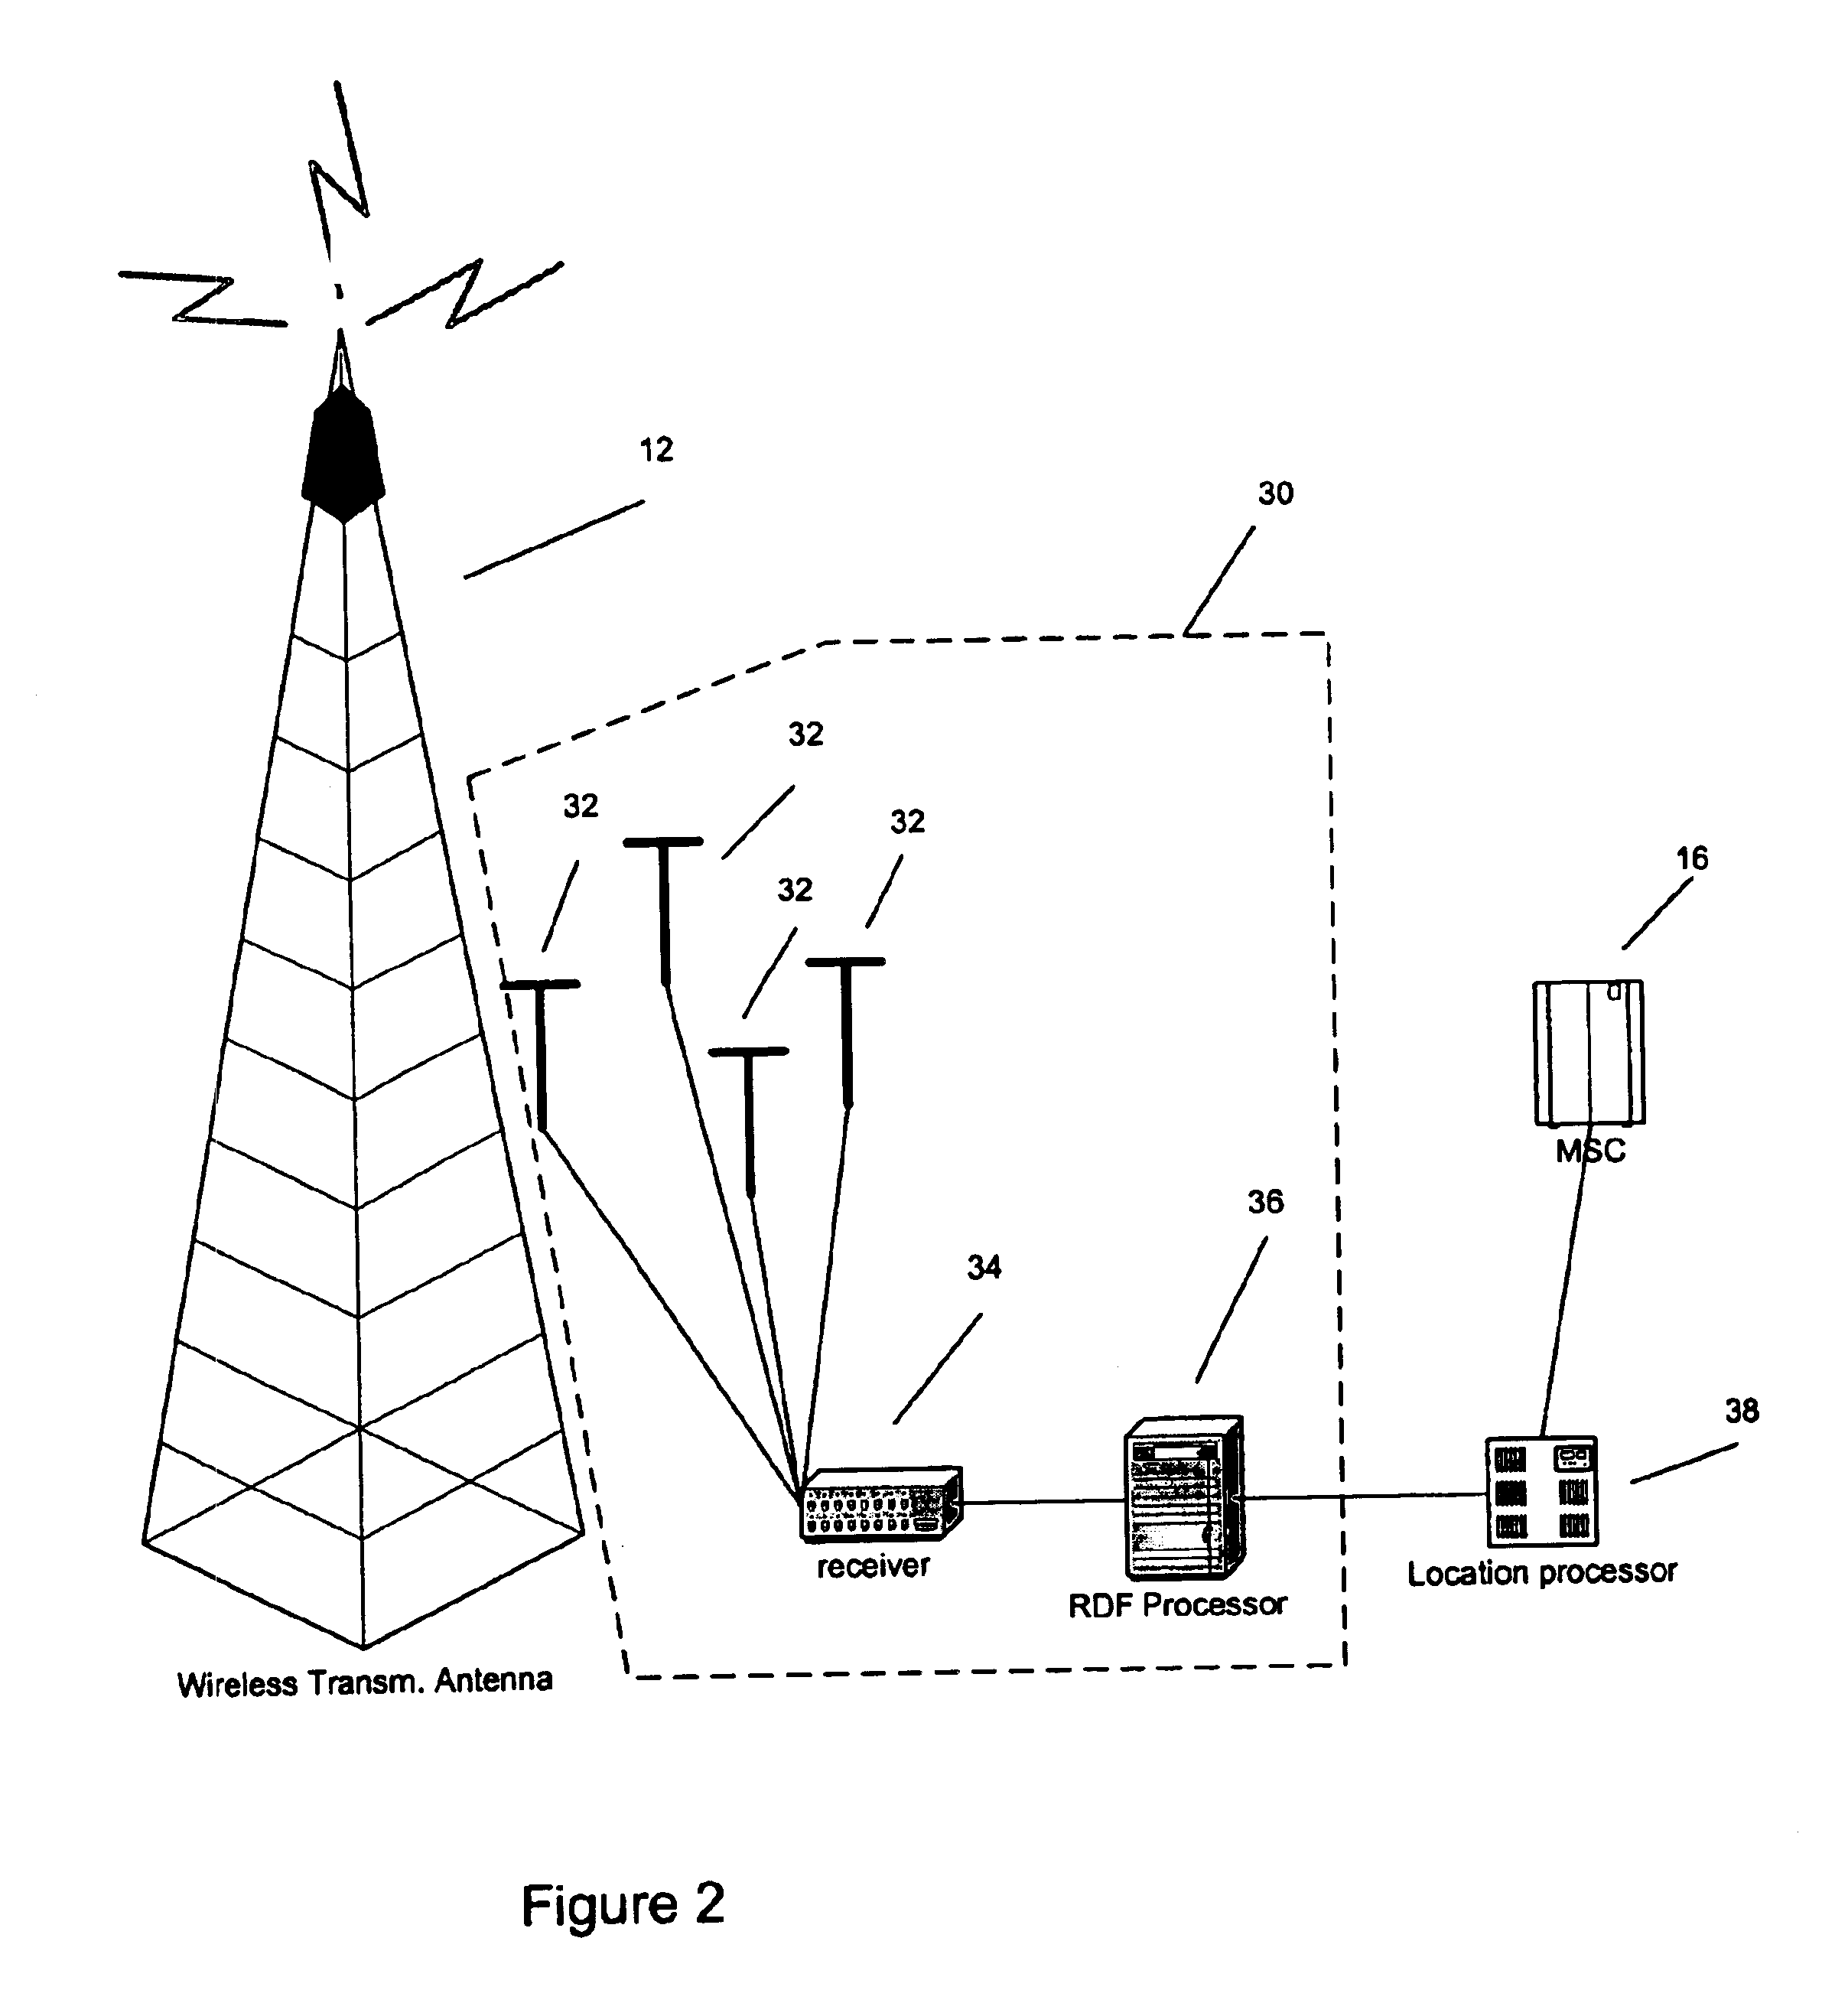 Methods for detecting, computing and disseminating location information associated with emergency 911 wireless transmissions